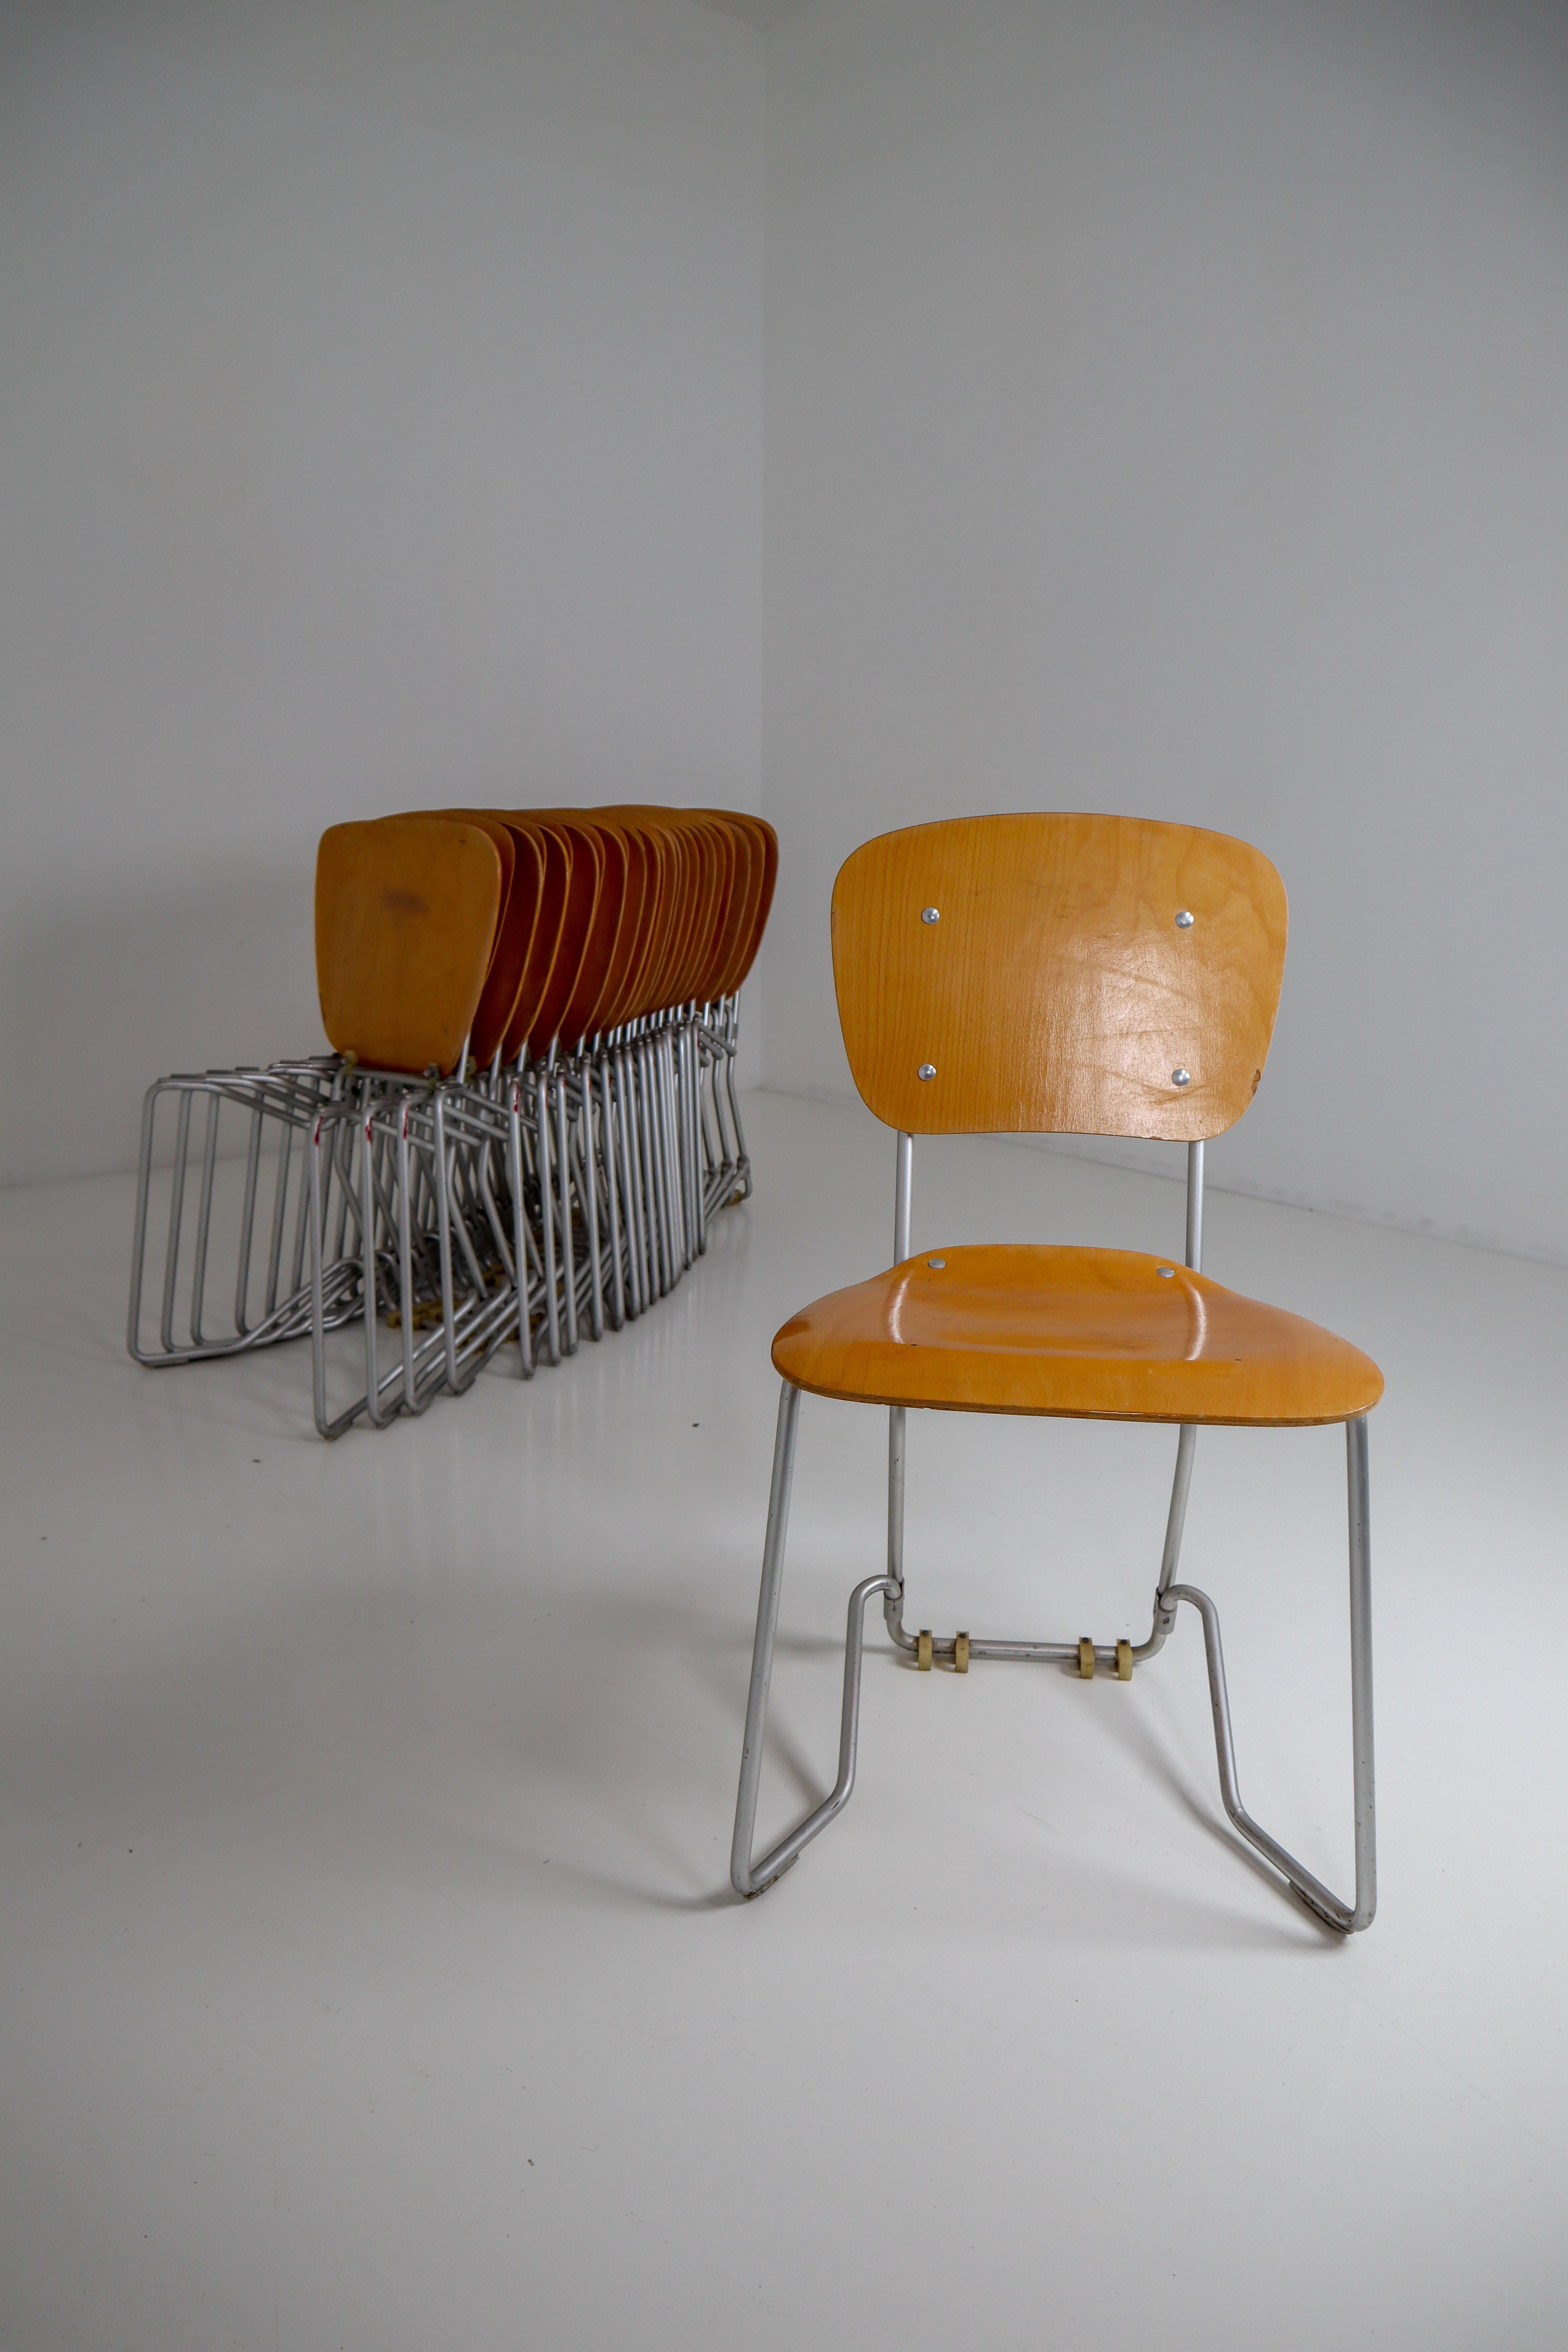 20 Chairs Designed by Armin Wirth for Hans Zollinger Sohre, Switzerland 2